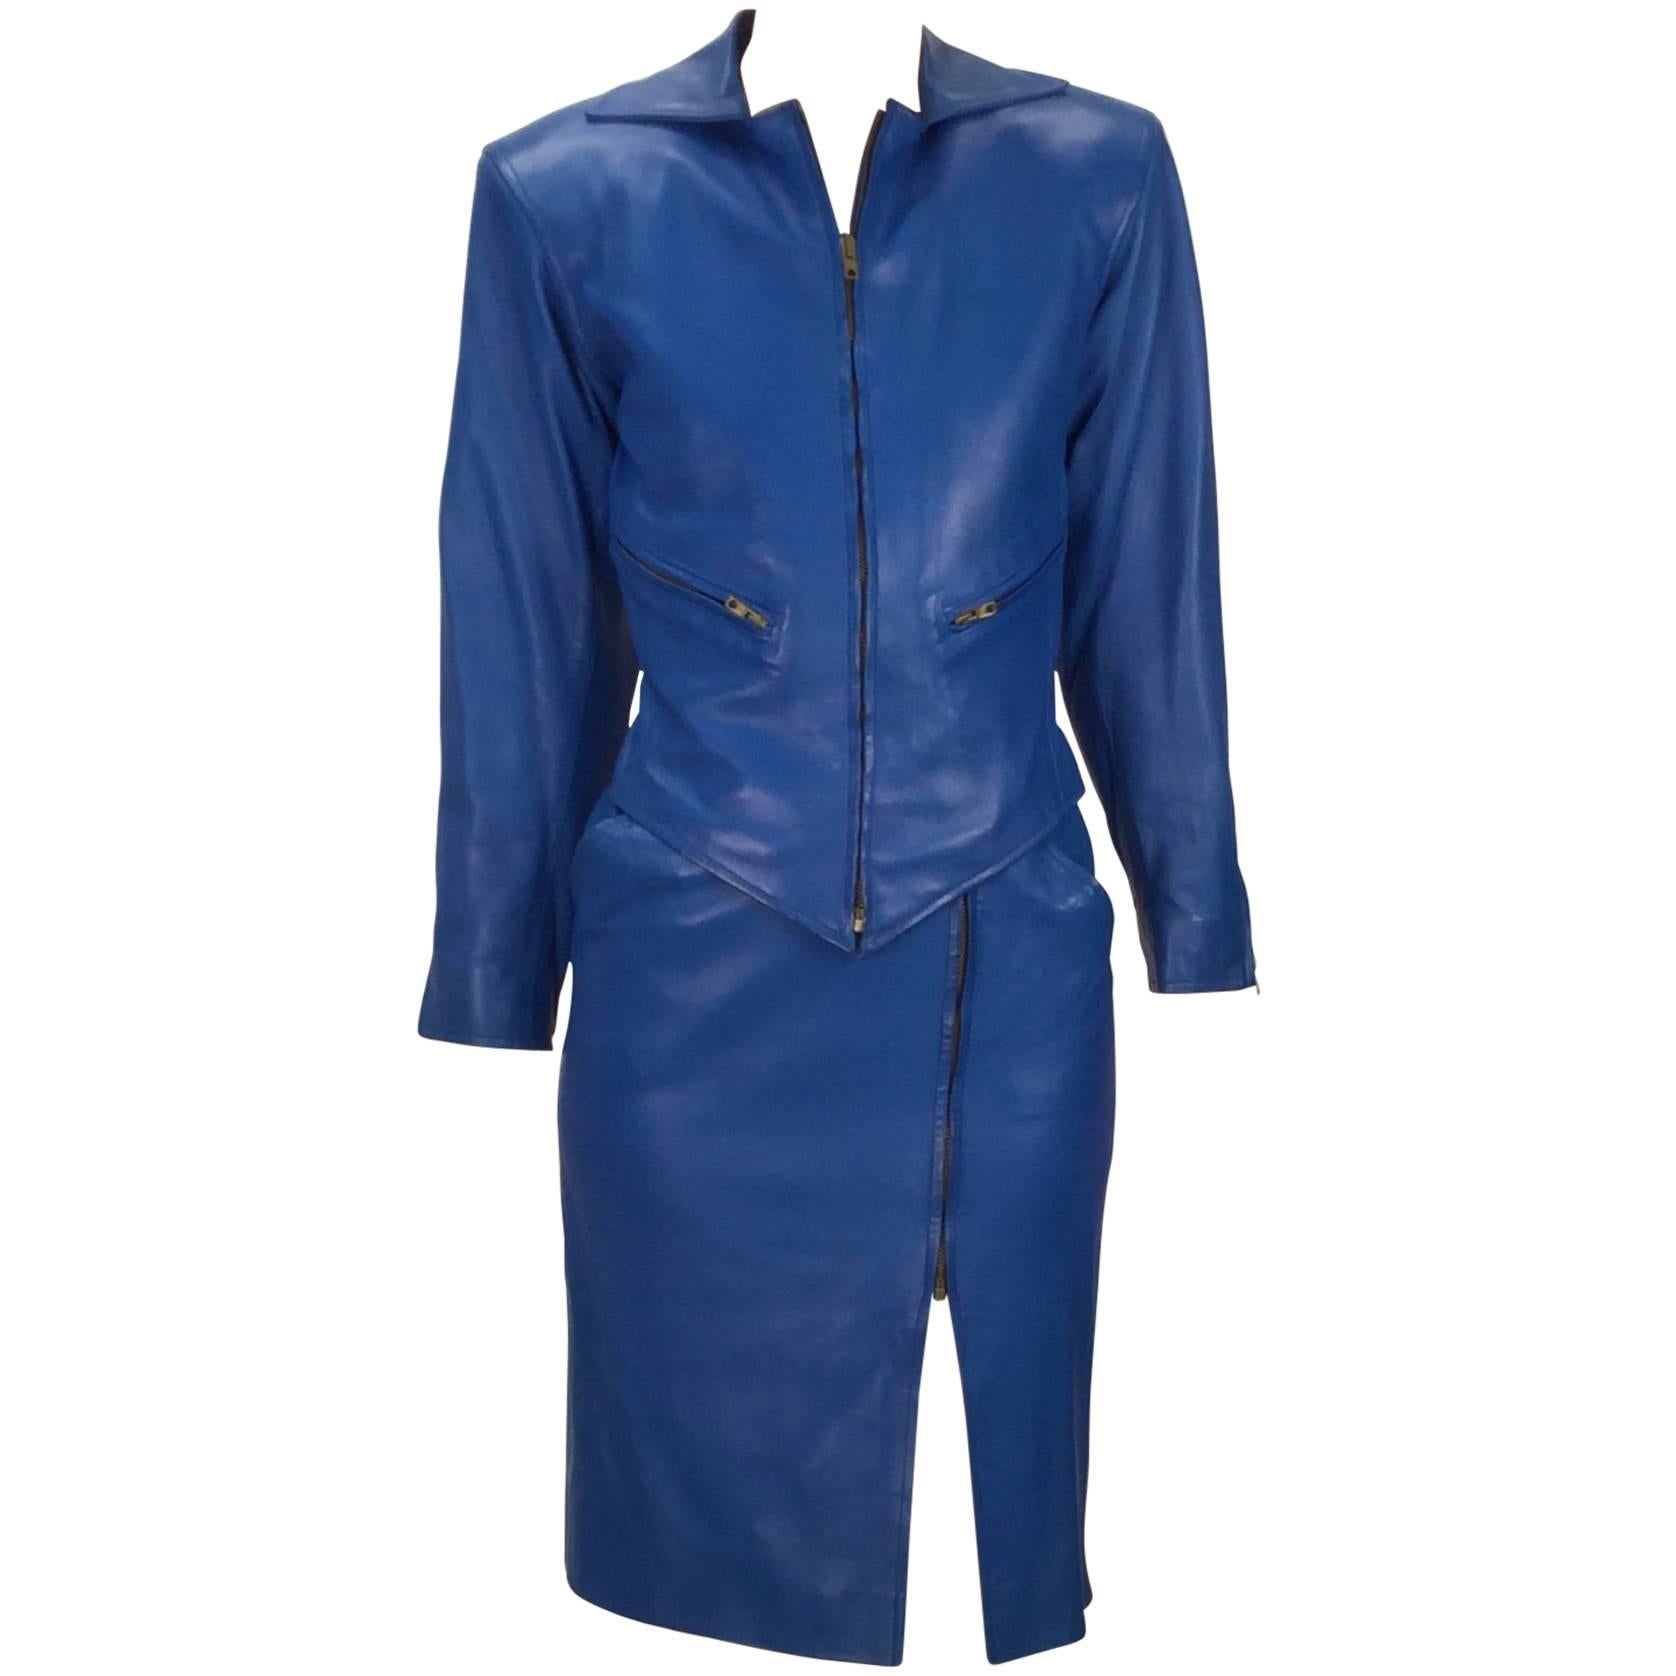 Yves Saint Laurent Blue Leather Jacket and Skirt Ensemble, 1980s  For Sale